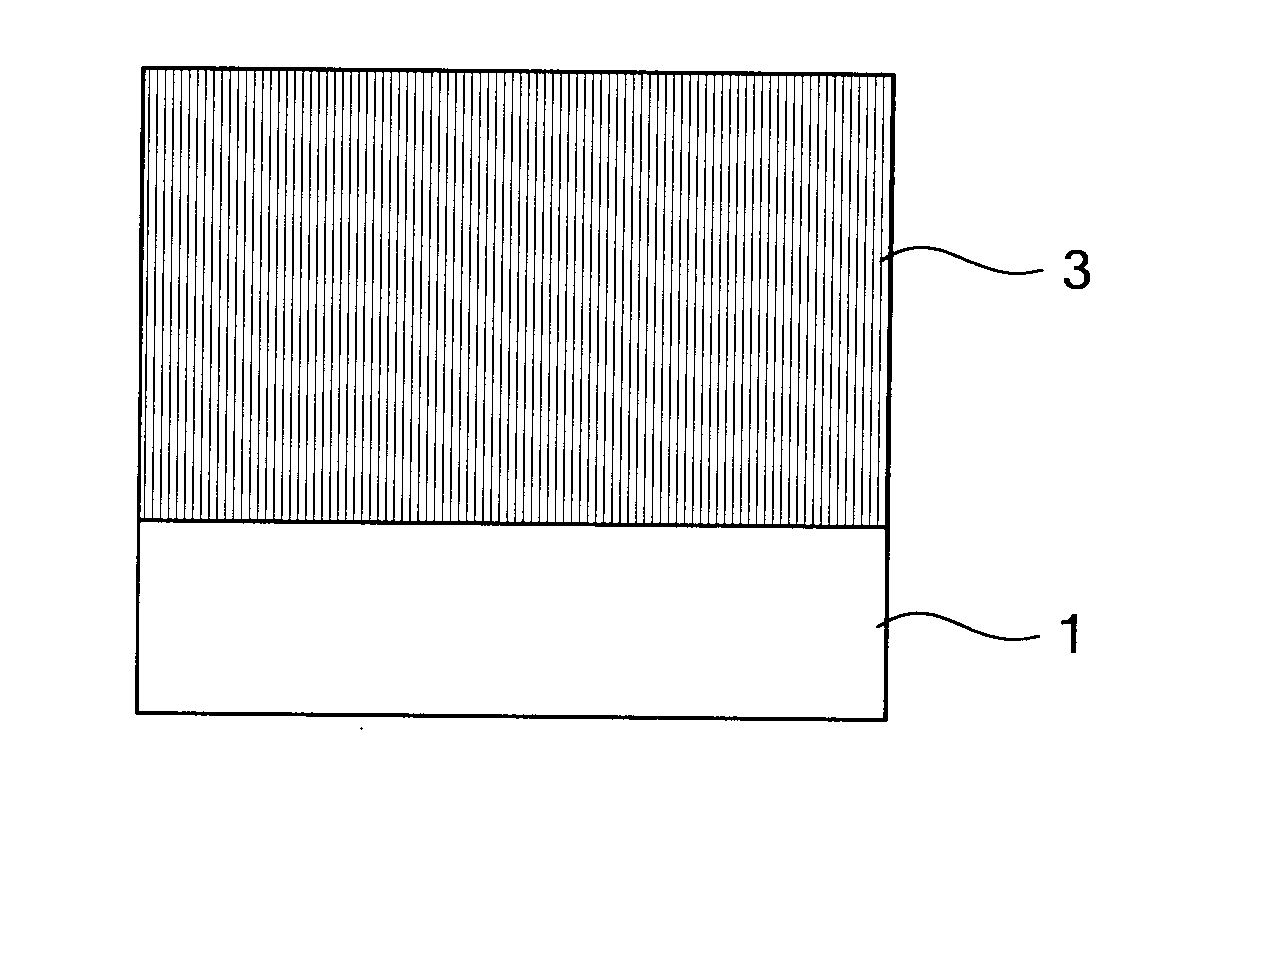 Electrophotographic photoconductor, image forming method, image forming apparatus, and process cartridge